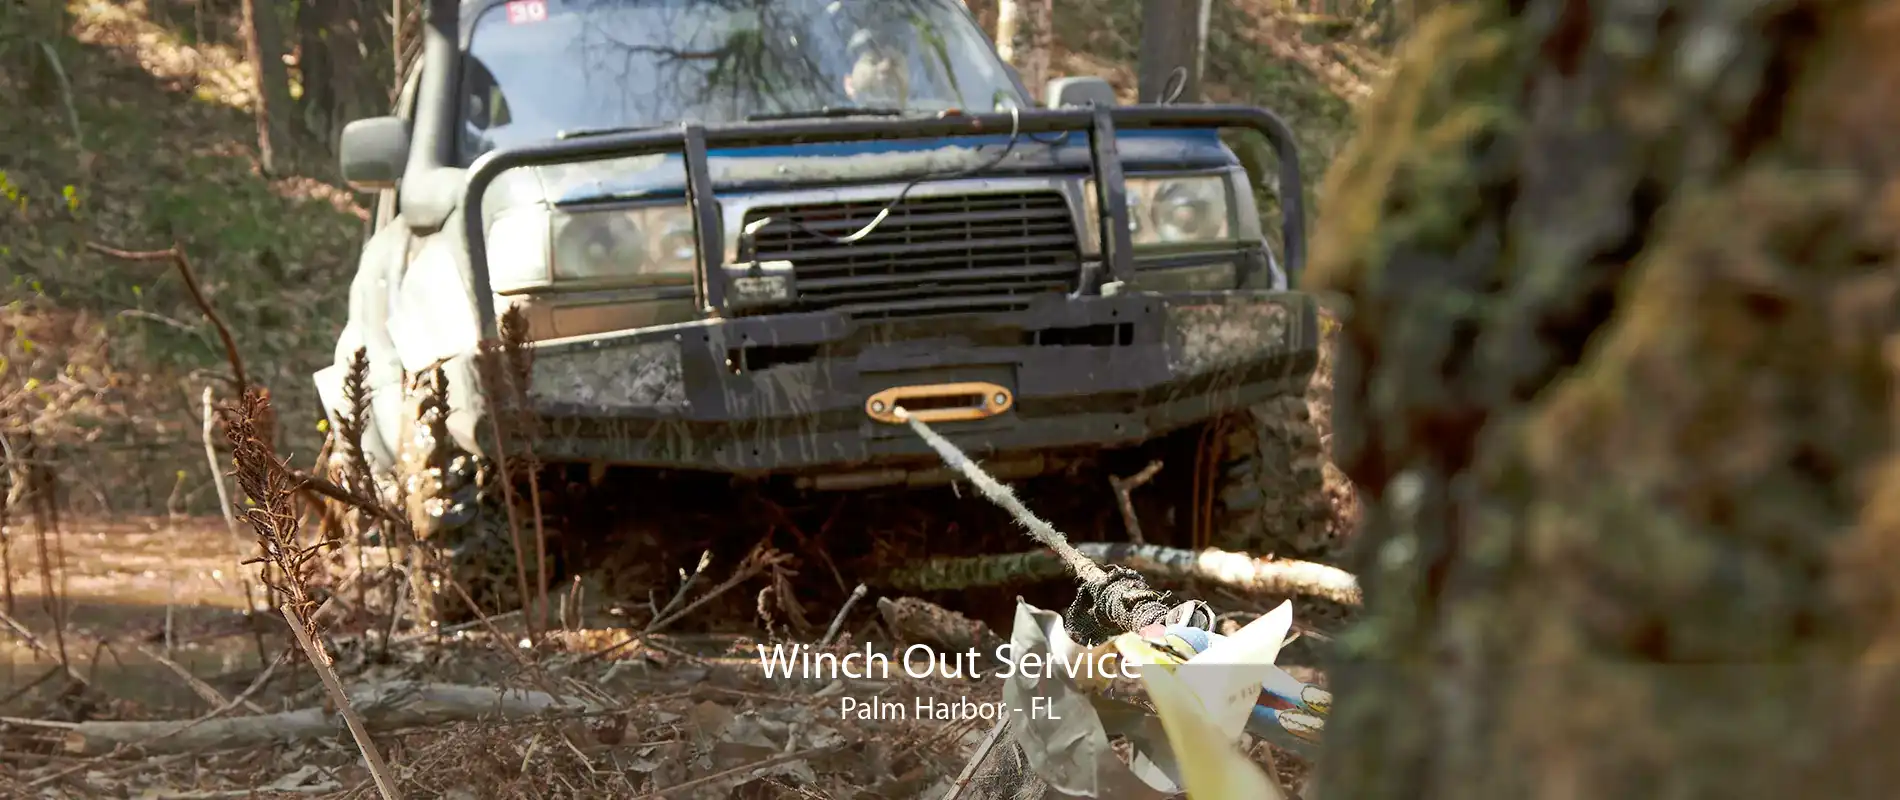 Winch Out Service Palm Harbor - FL